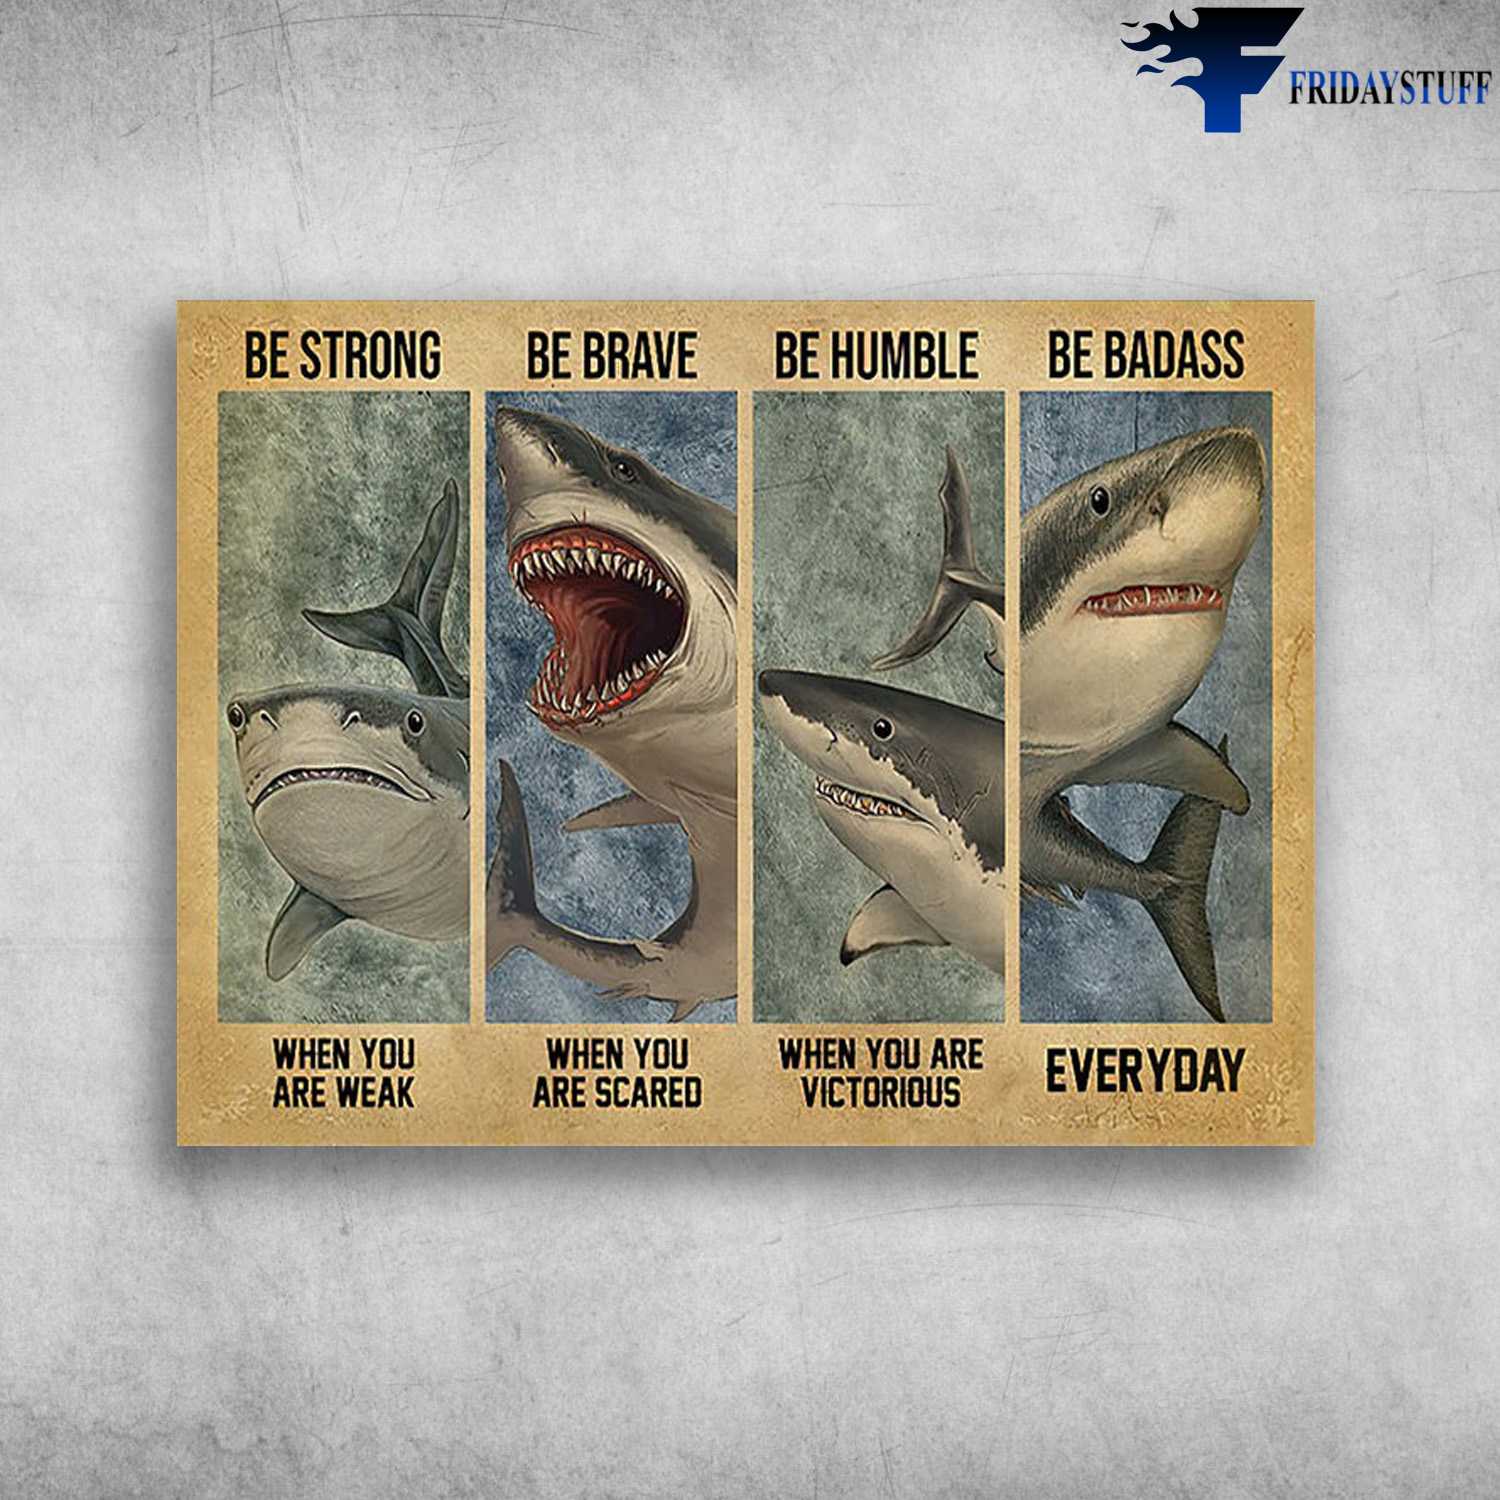 Hungry Shark - Be Strong When You Are Weak, Be Brave When You Are Scared, Be Humble When You Are Victorious, Be Badass Everyday